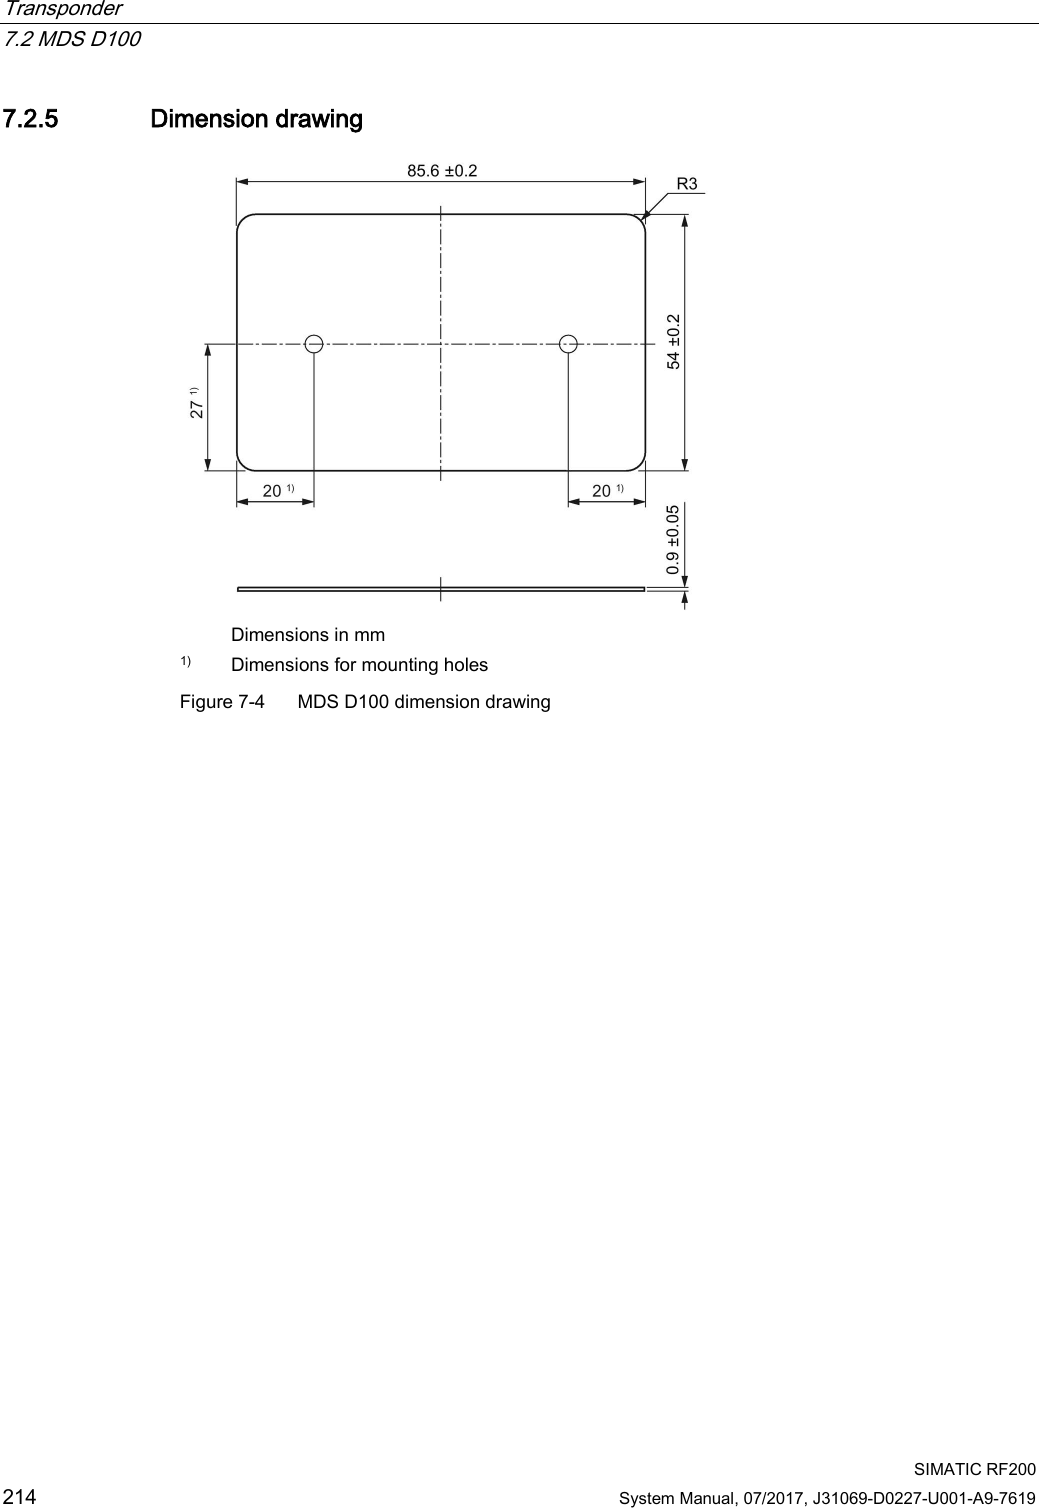 Transponder   7.2 MDS D100  SIMATIC RF200 214 System Manual, 07/2017, J31069-D0227-U001-A9-7619 7.2.5 Dimension drawing   Dimensions in mm 1) Dimensions for mounting holes Figure 7-4  MDS D100 dimension drawing 